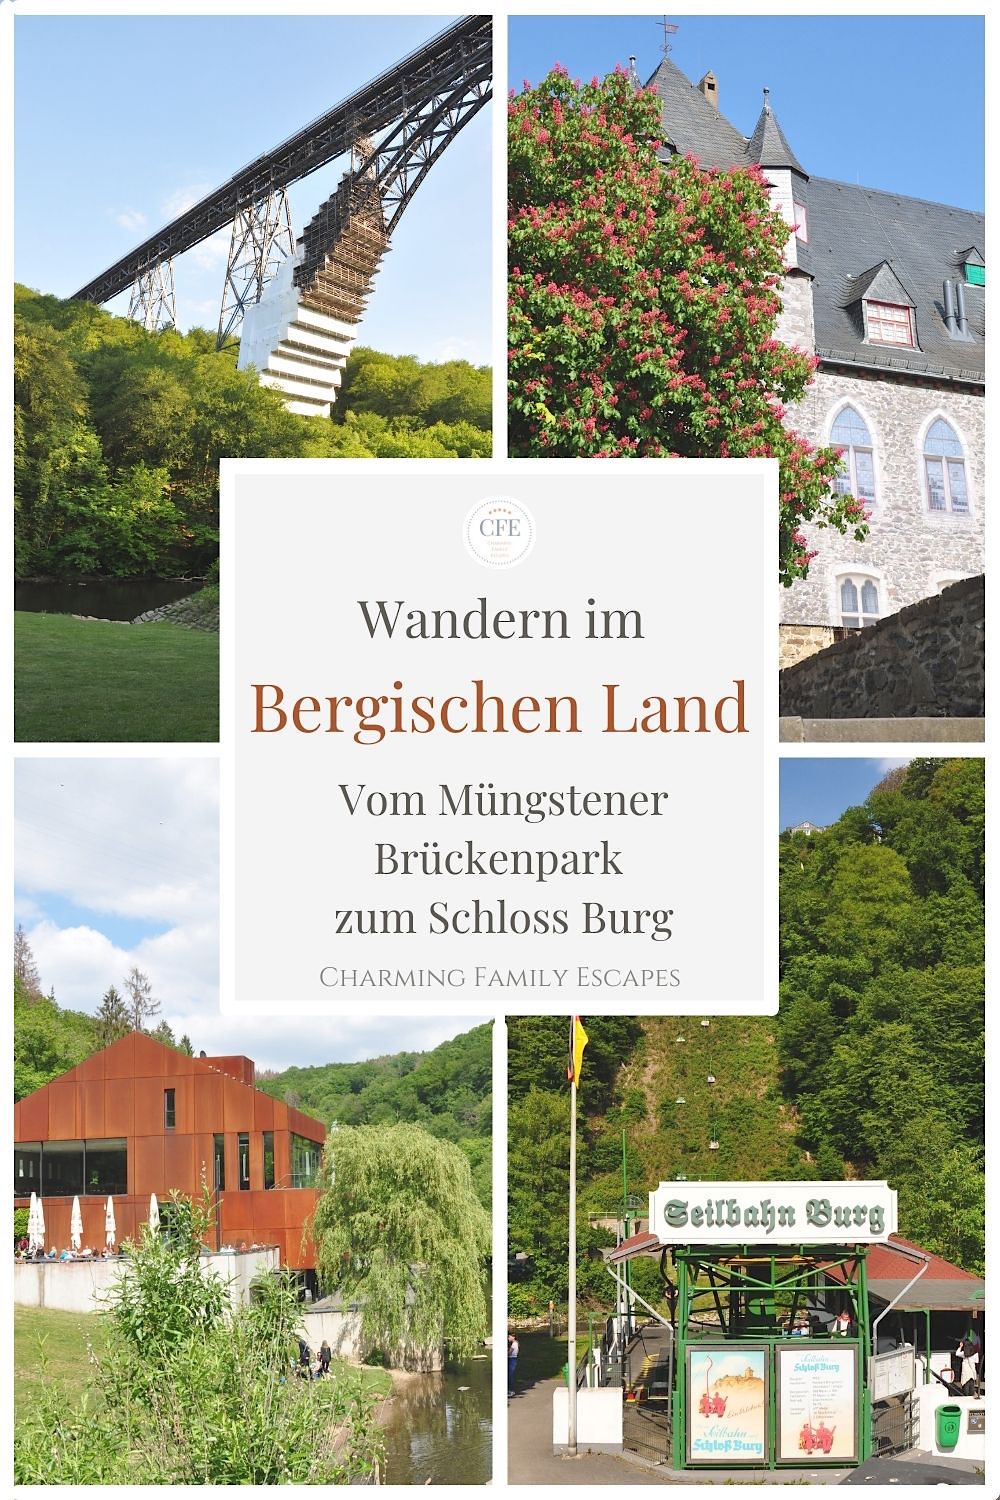 Hiking in the Bergisches Land - from the Müngsten Bridge Park to Burg Castle